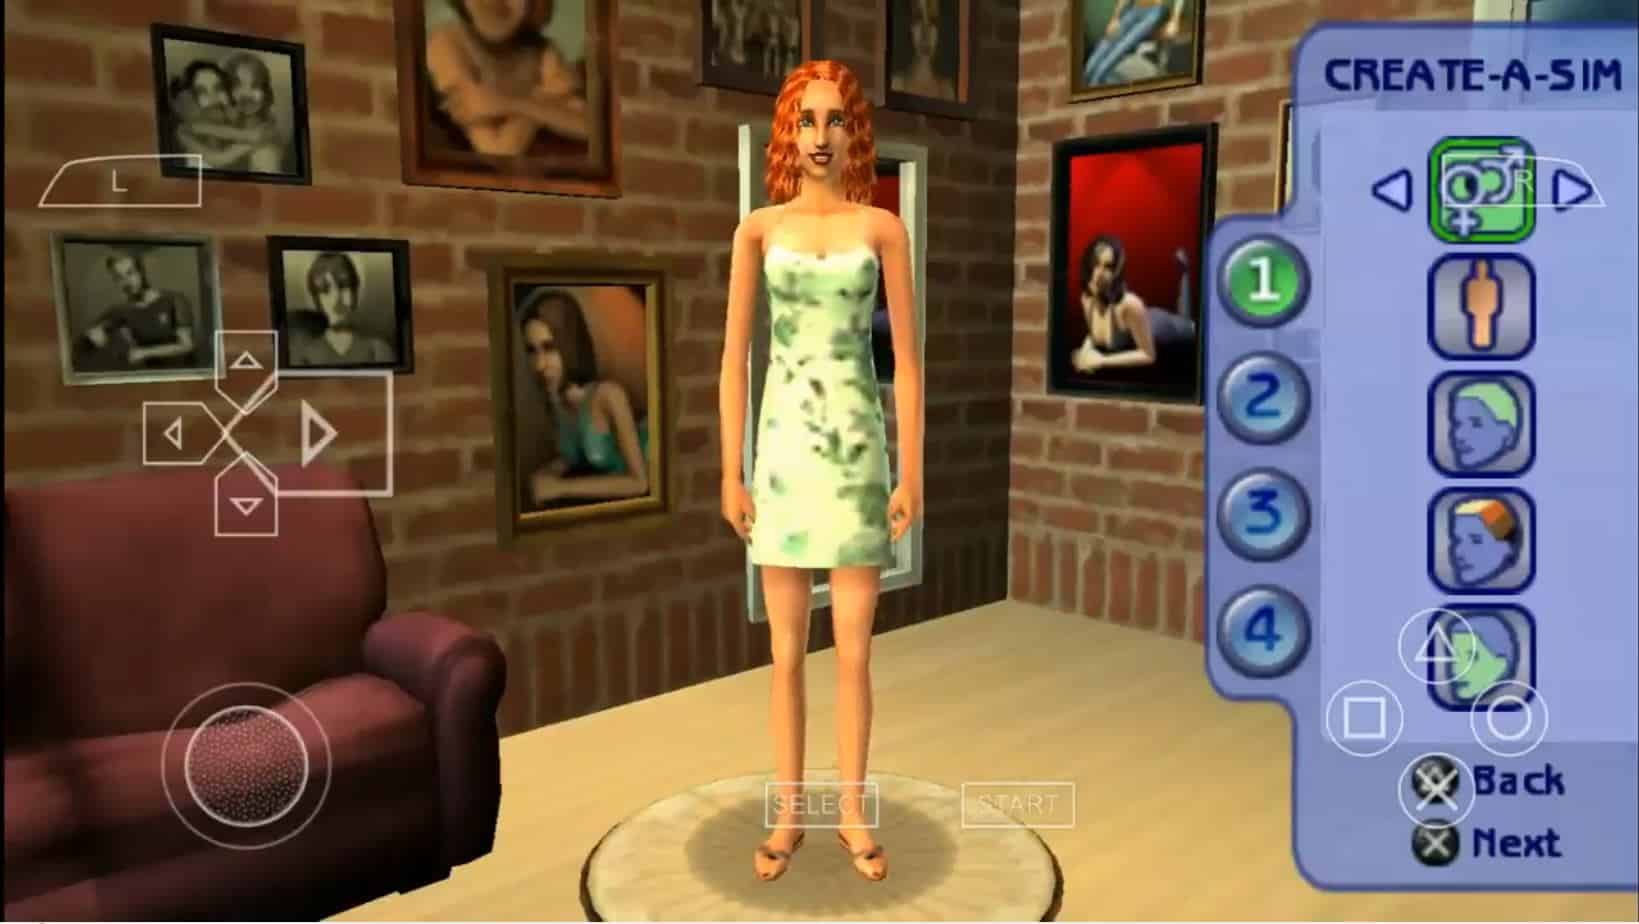 The sims 2 psp